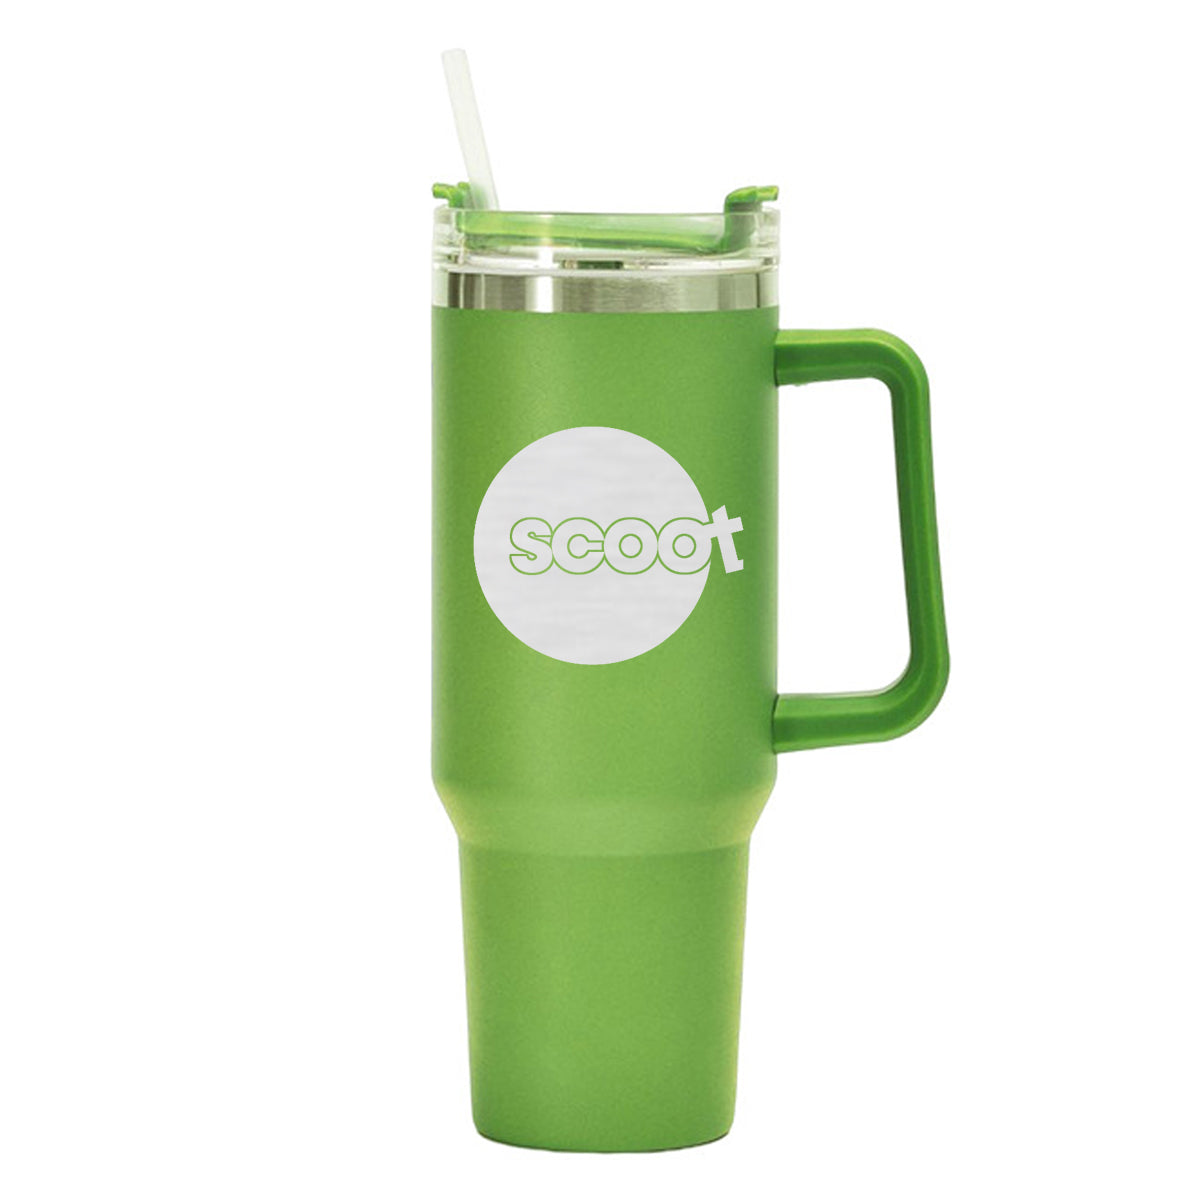 Scoot Airlines Designed 40oz Stainless Steel Car Mug With Holder